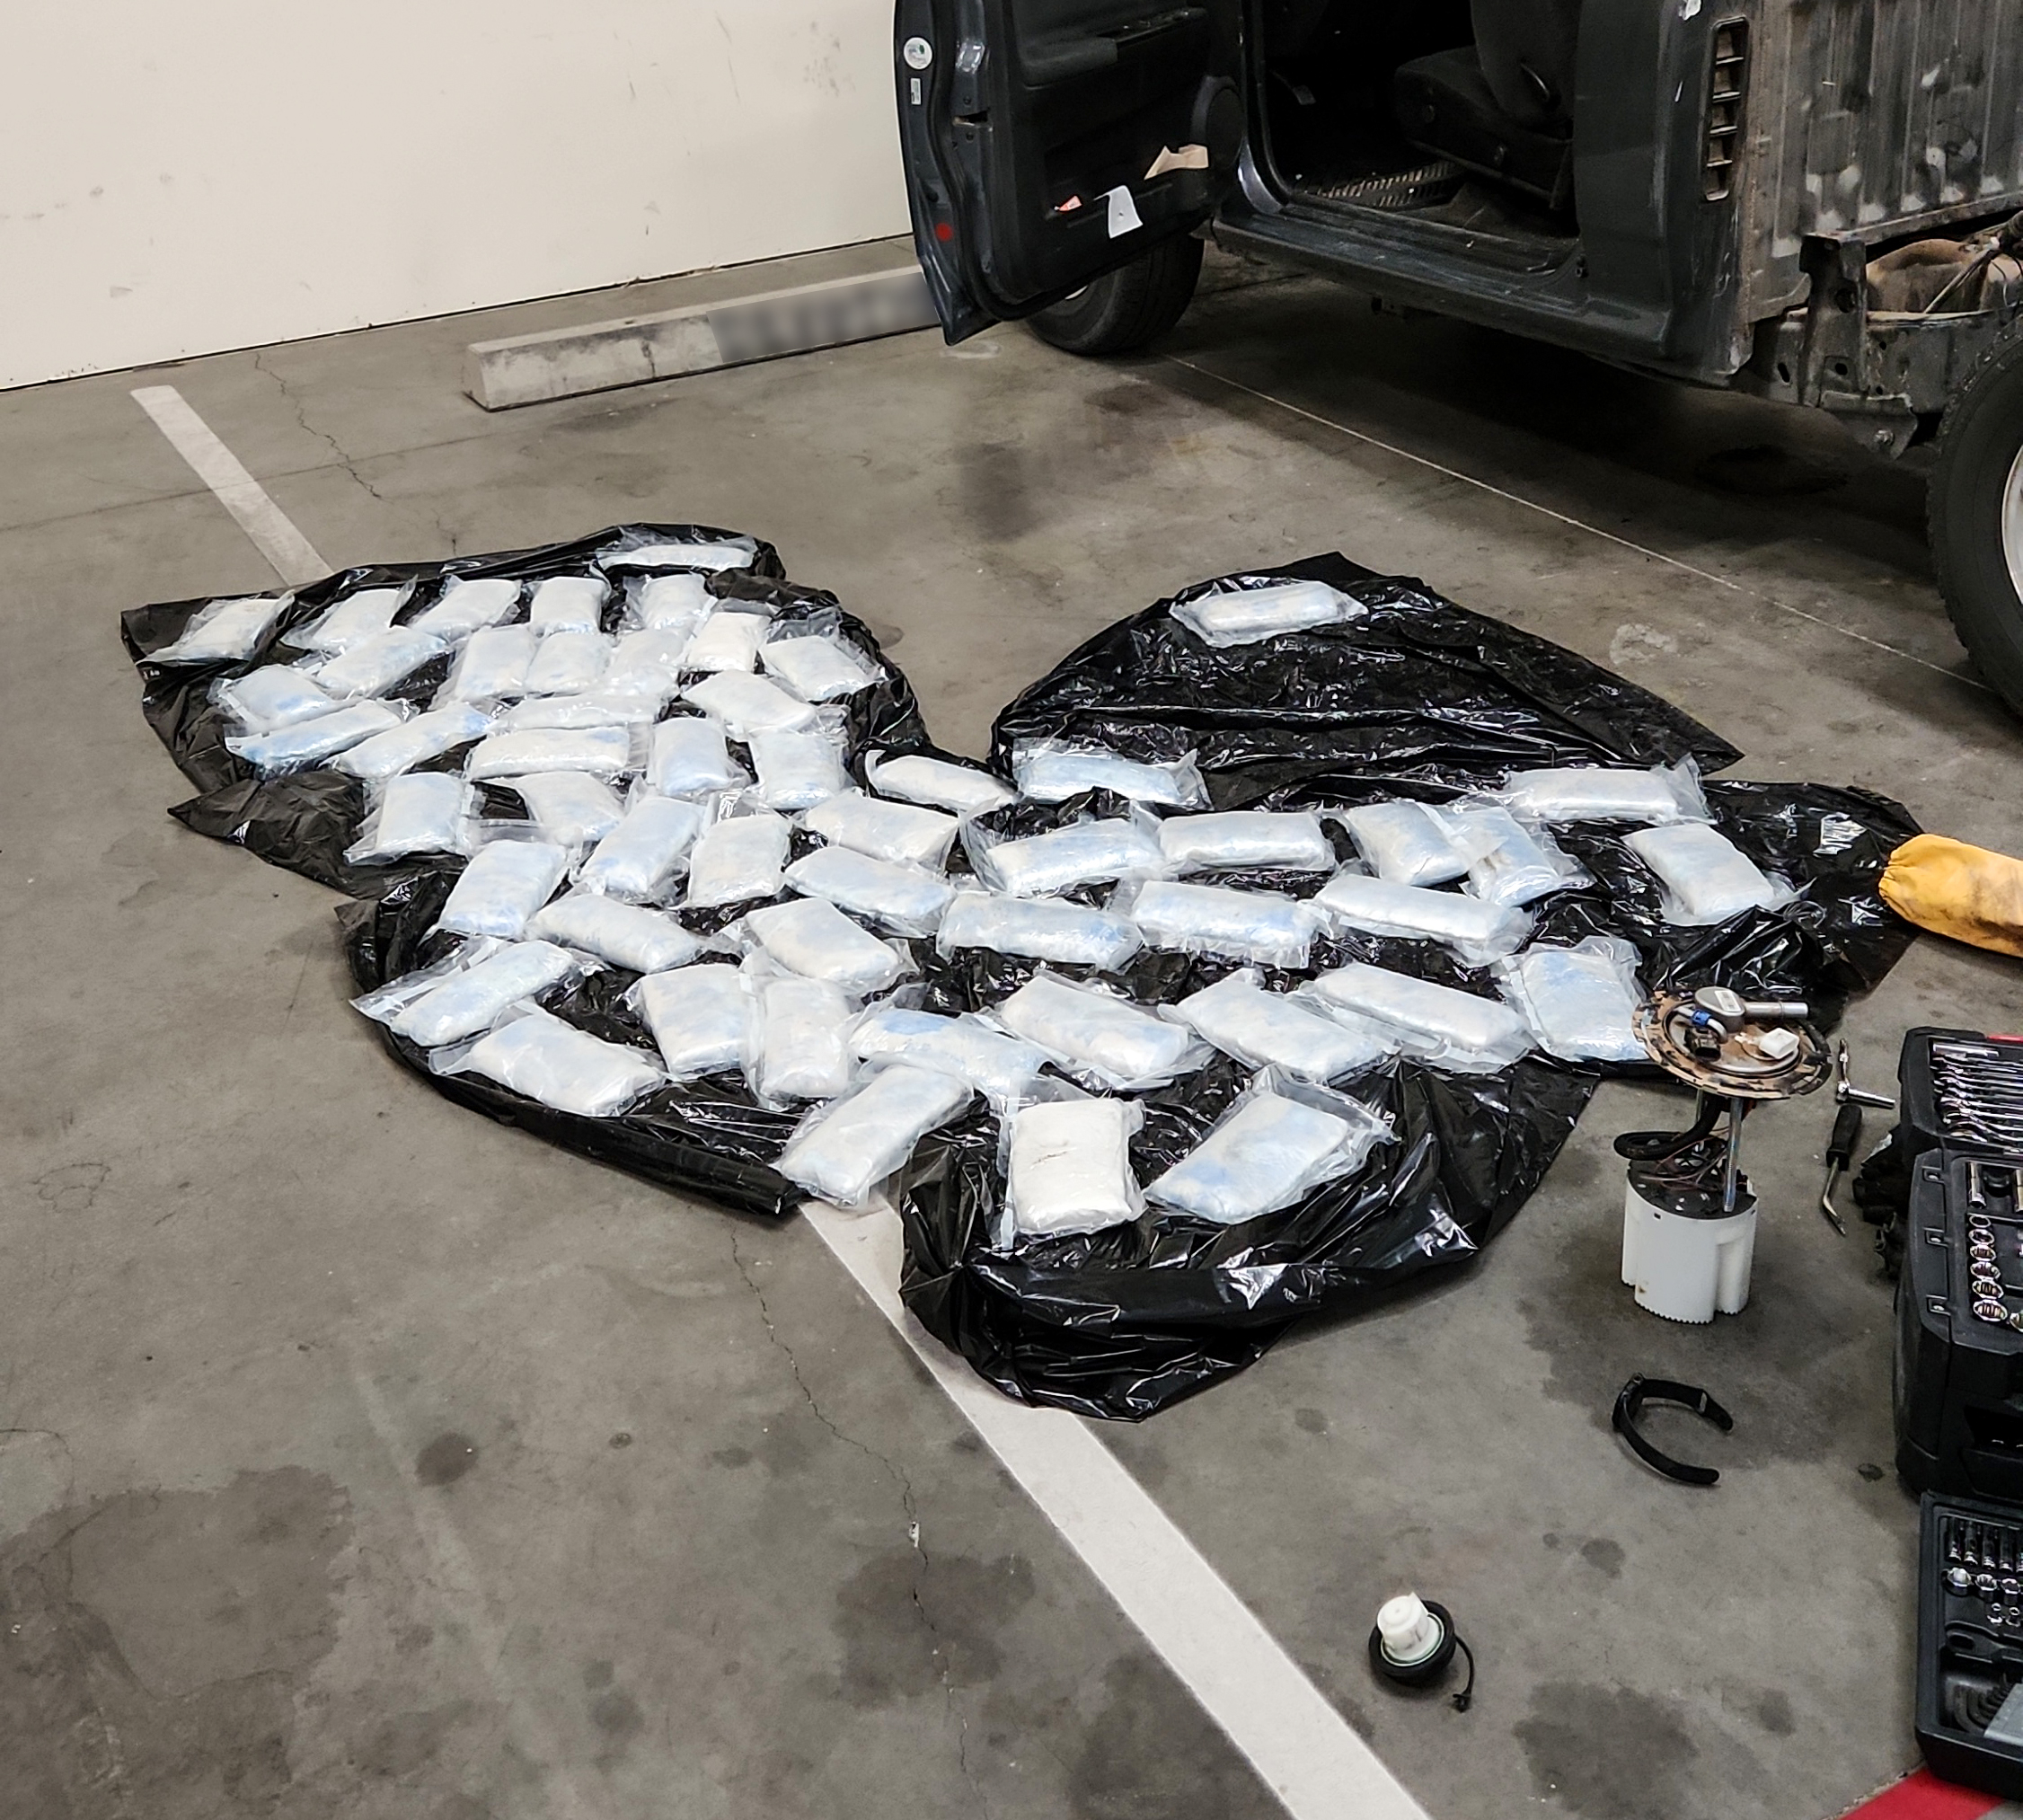 Plastic wrapped bundles on the ground next to a vehicle